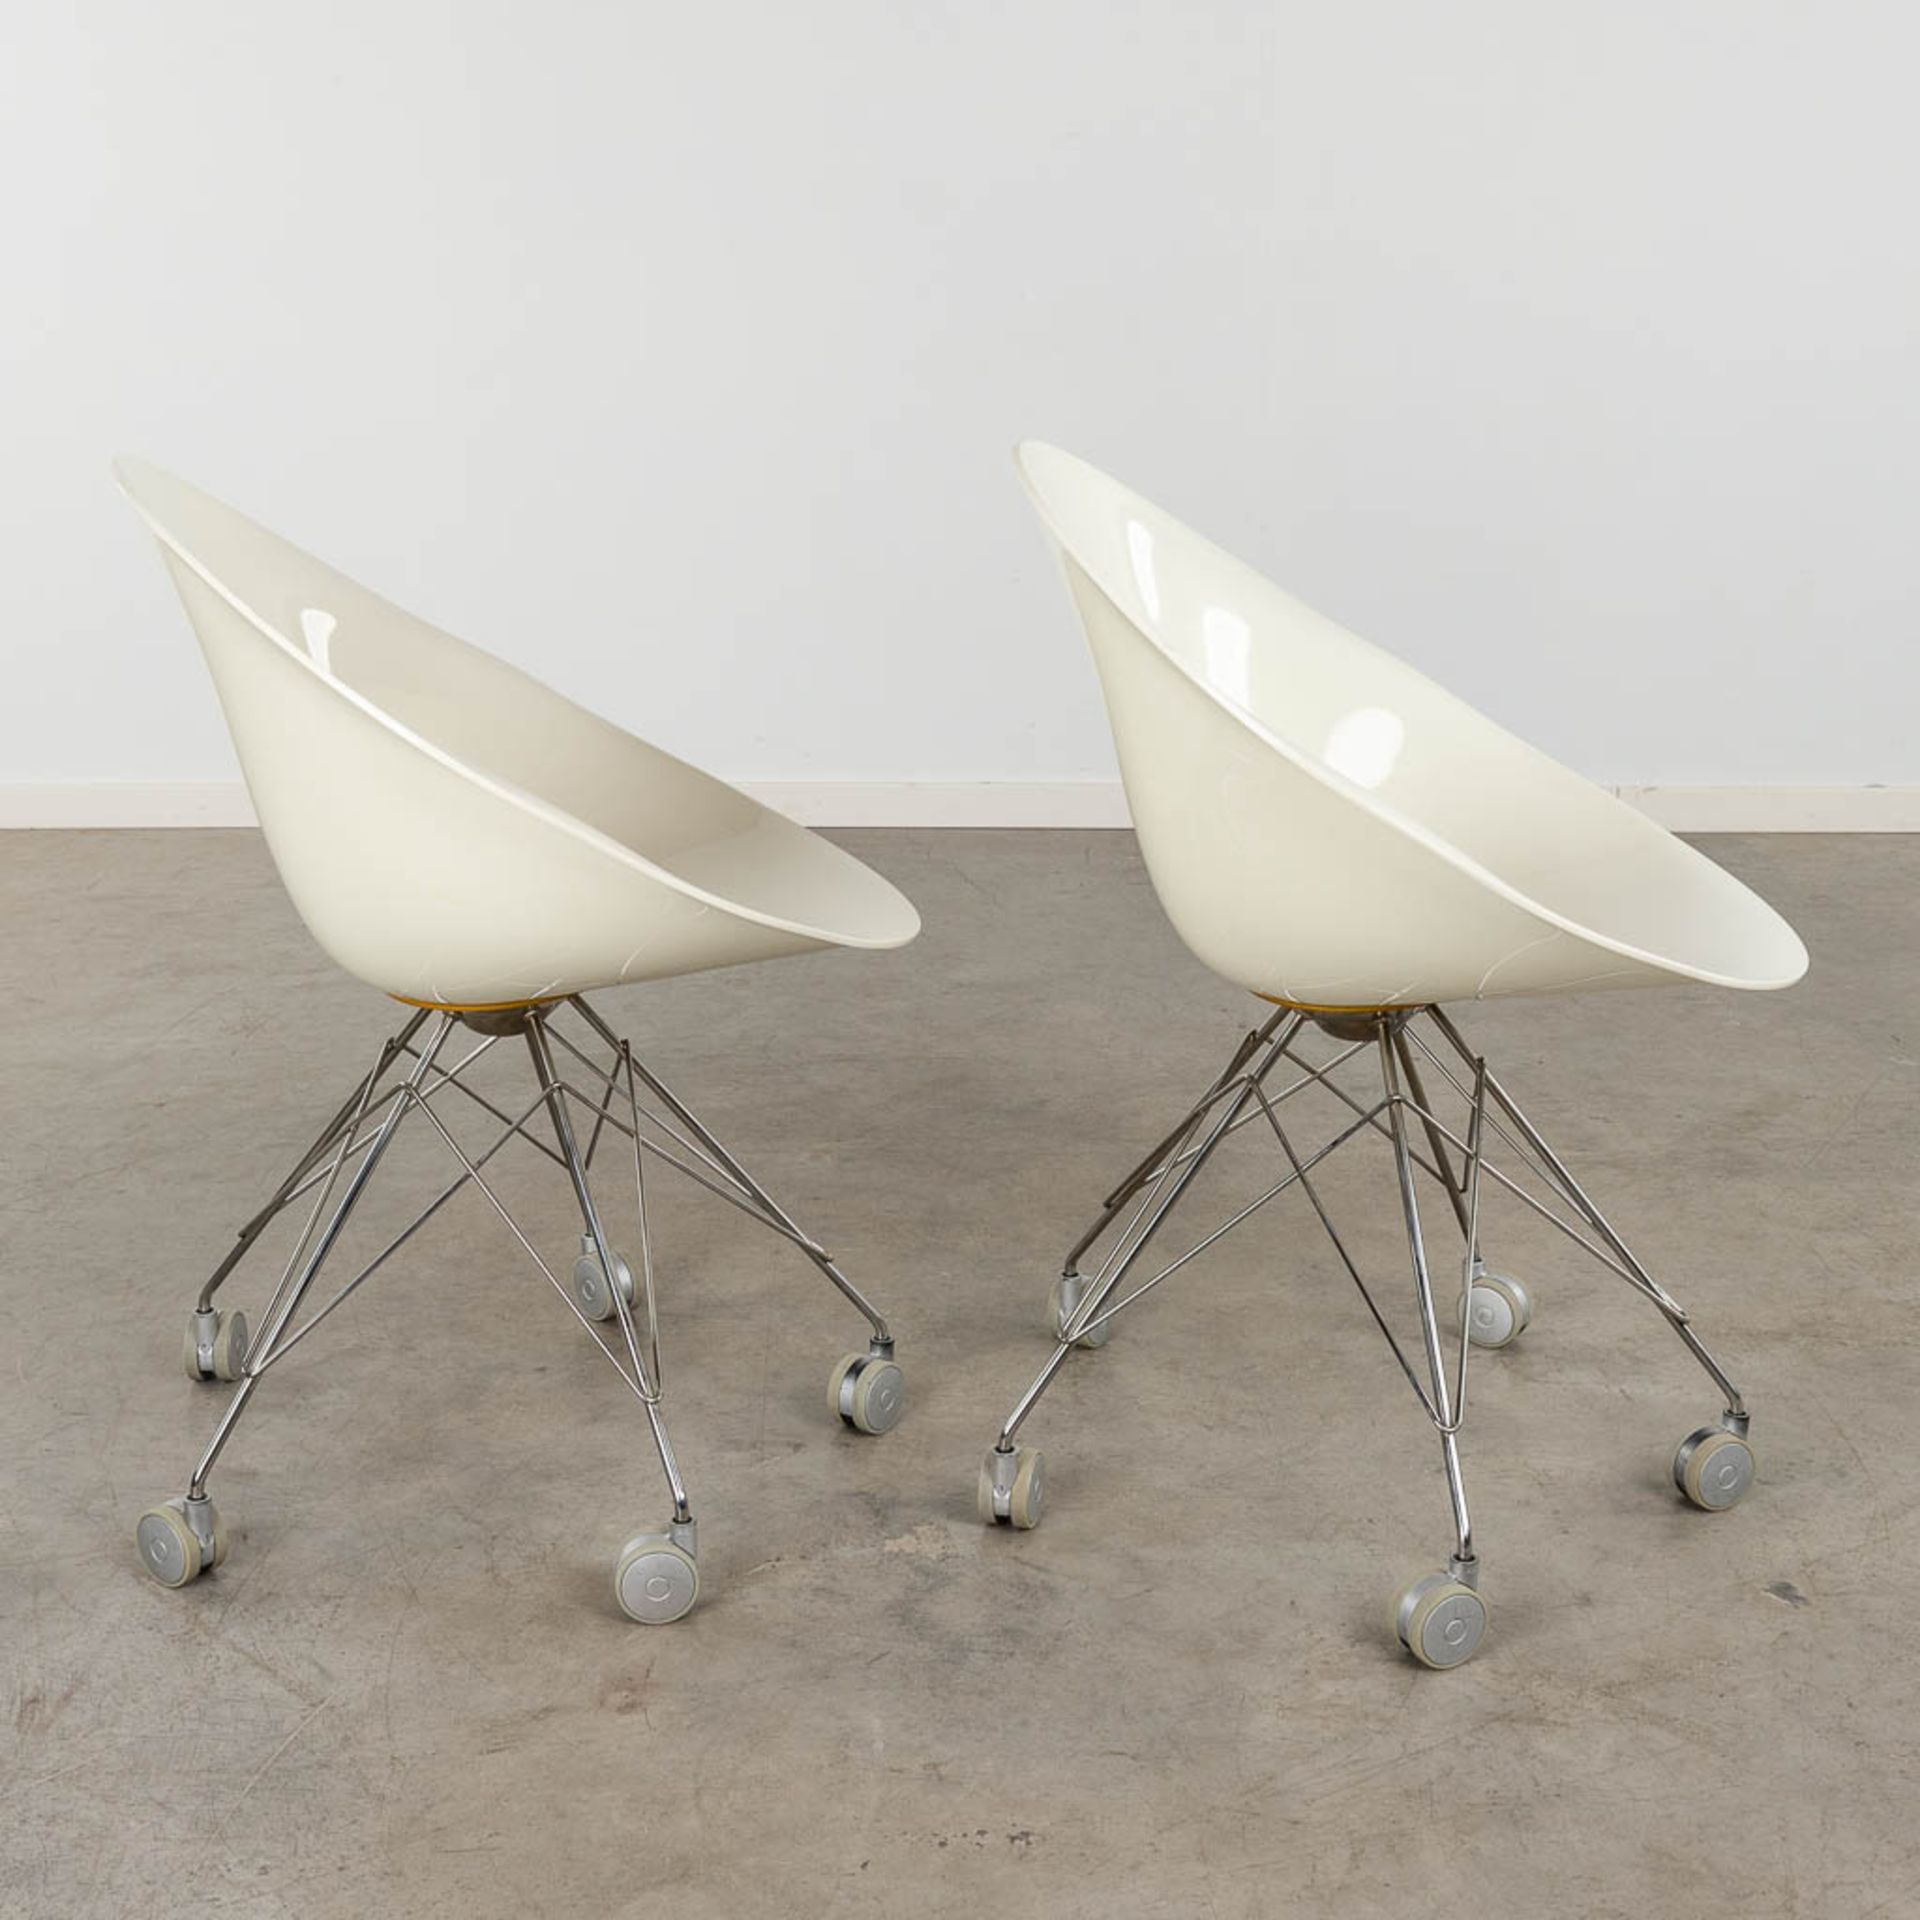 Philippe STARCK (1949) 'Ero' for Kartell, two office chairs. (D:59 x W:62 x H:82 cm) - Image 4 of 14